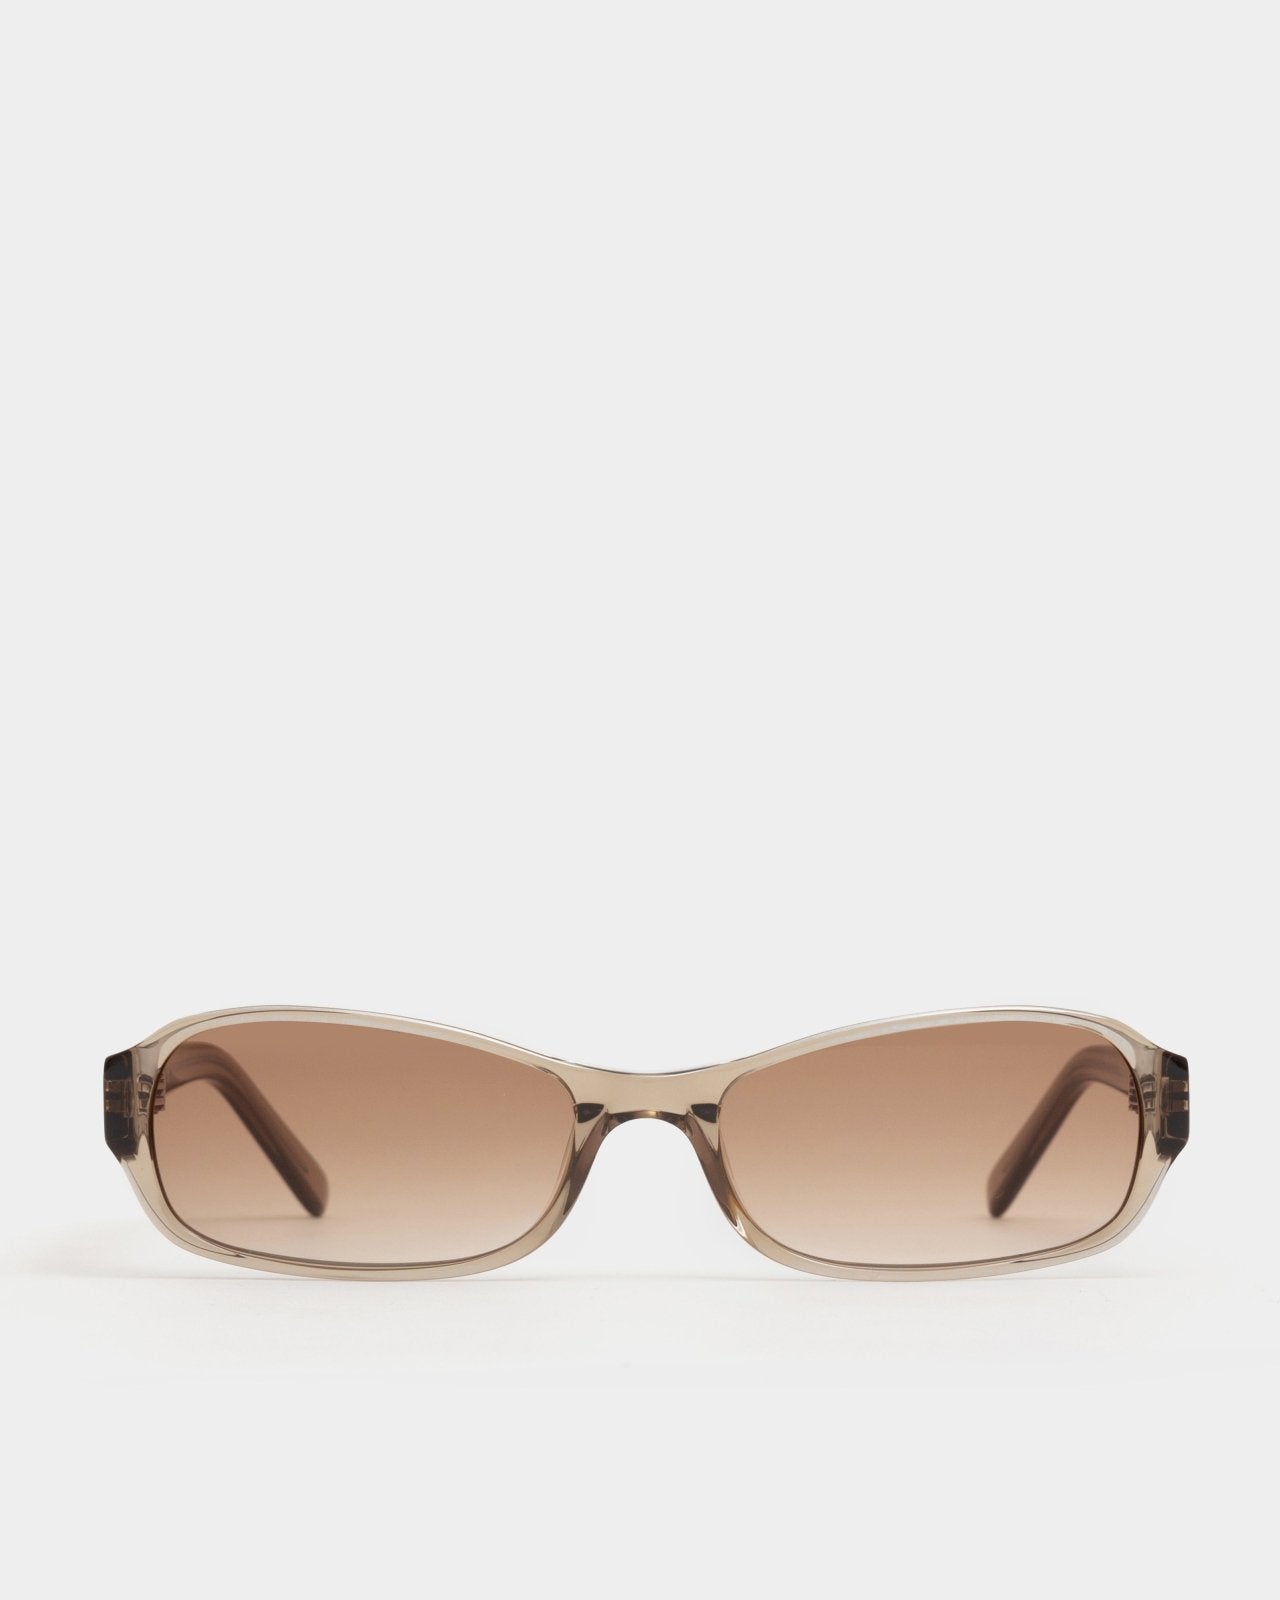 Juno Transparent Oyster Rectangular Sunglasses | DMY BY DMY